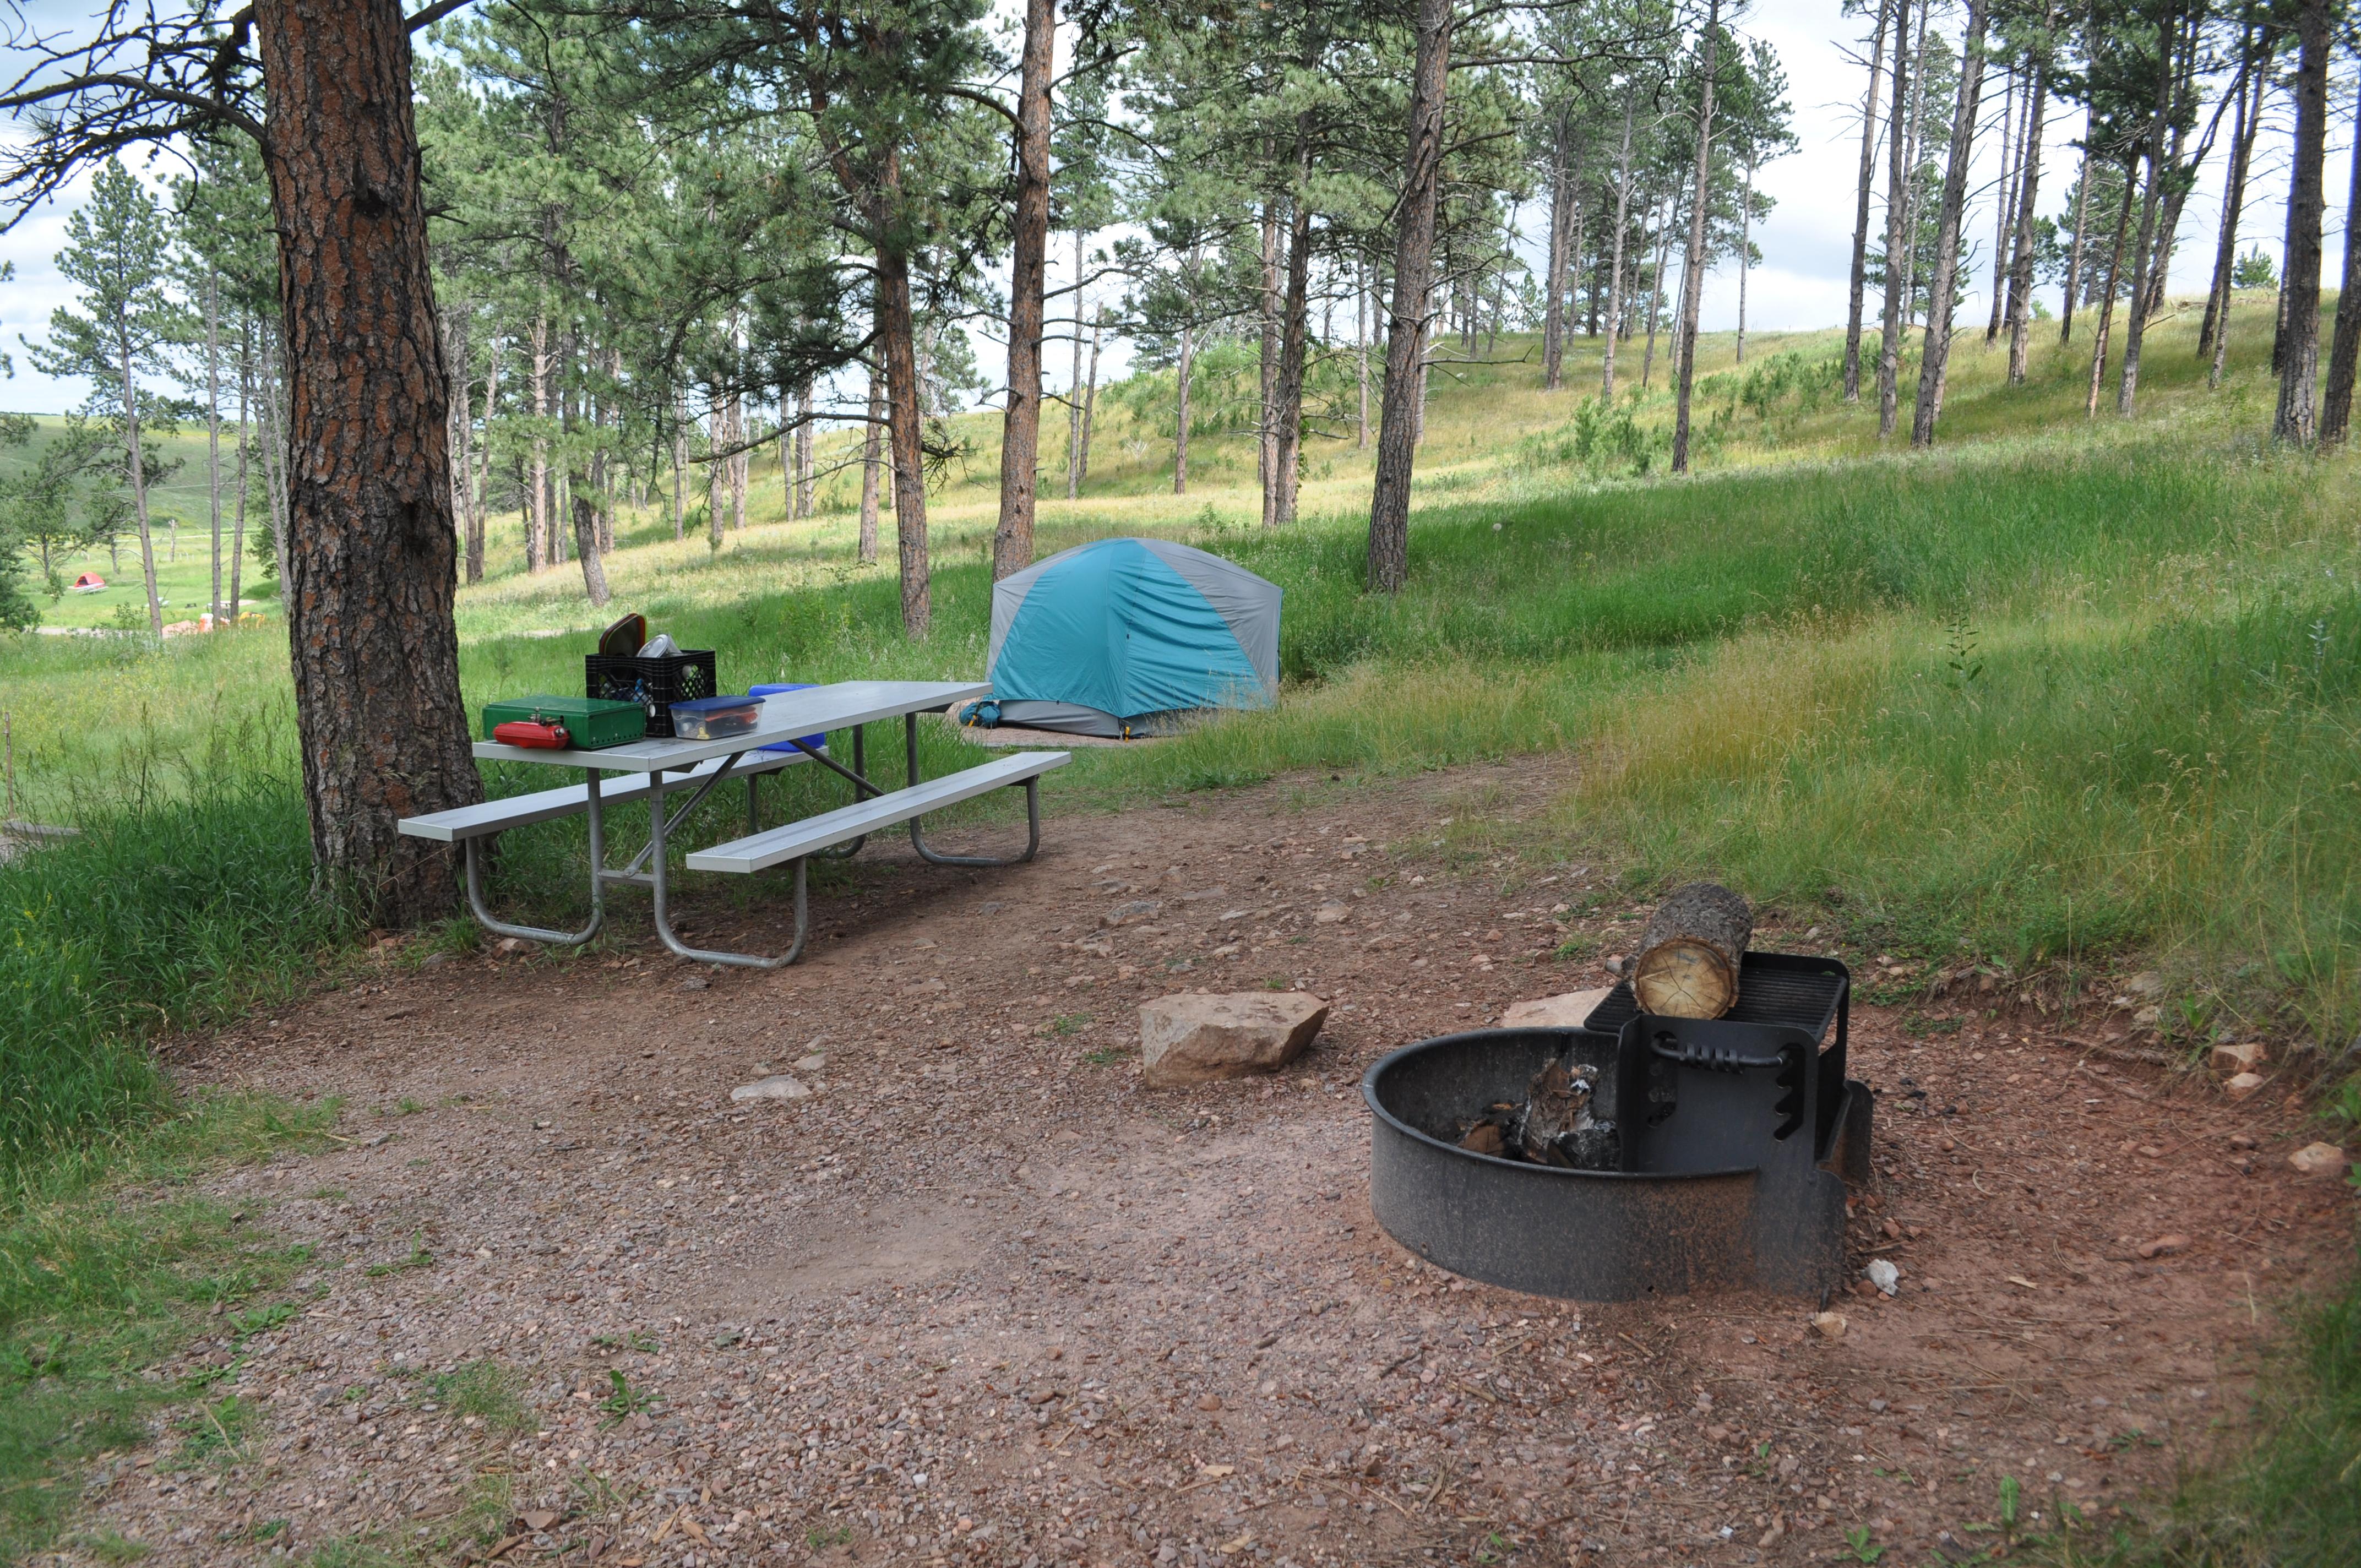 A campsite is set up with a tent, picnic bench and metal fire ring.